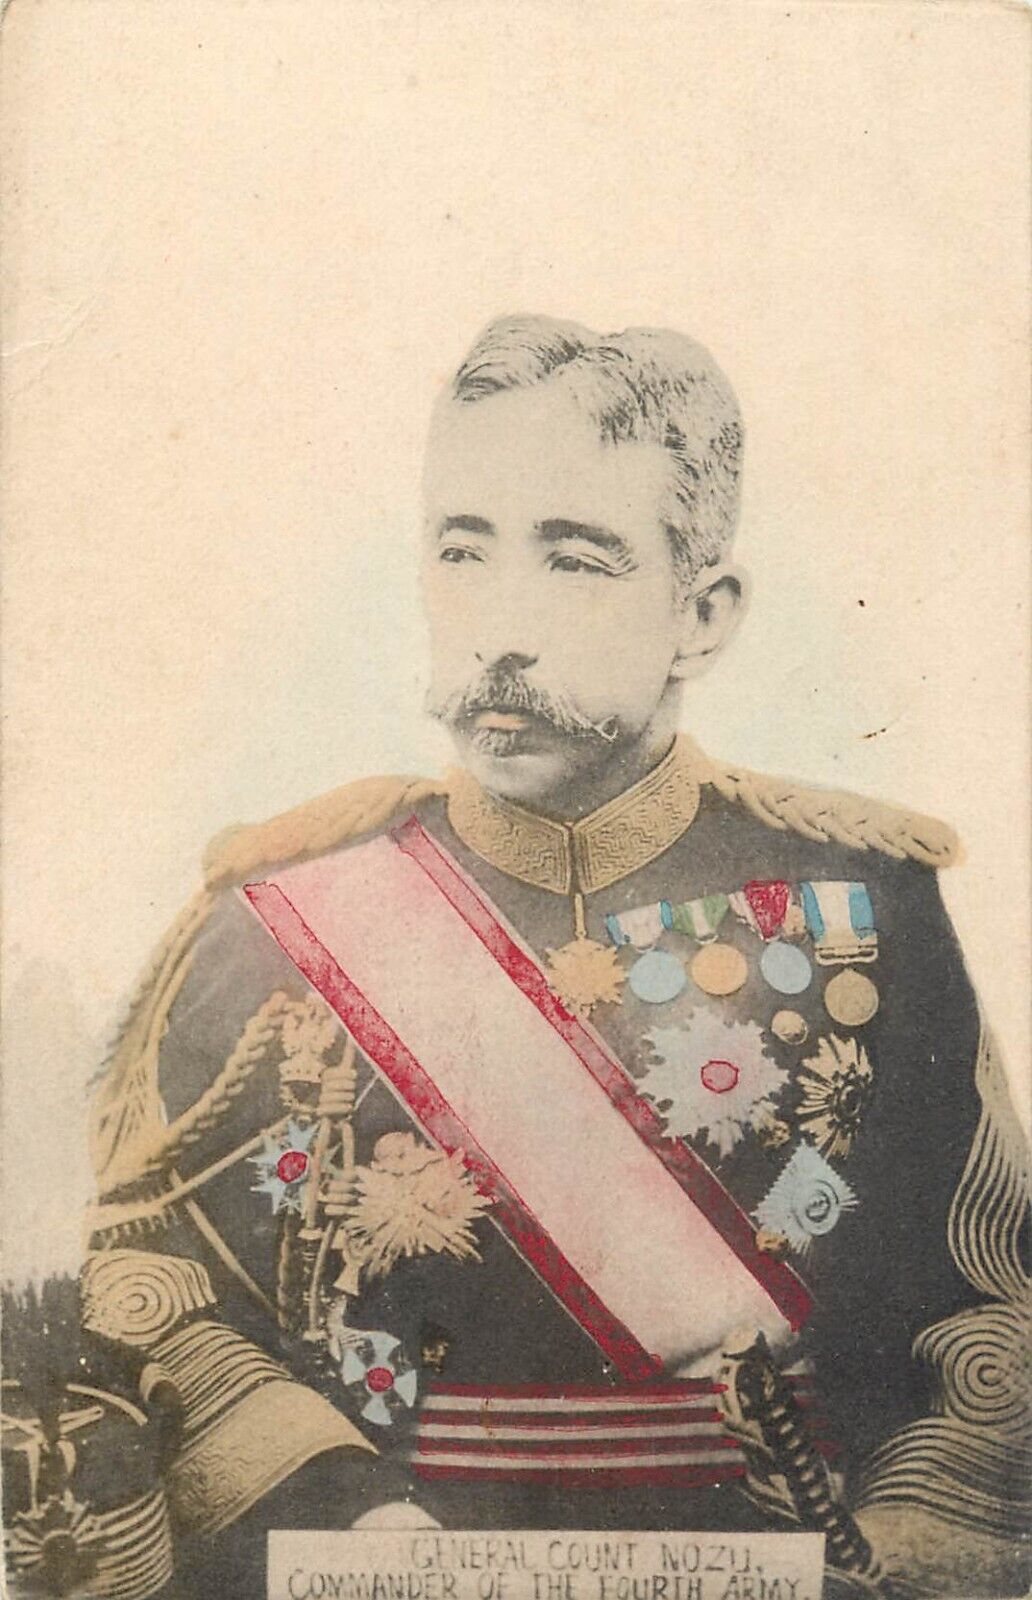 Imperial Japanese General Count Nozu Commander of the Fourth Army Japan postcard